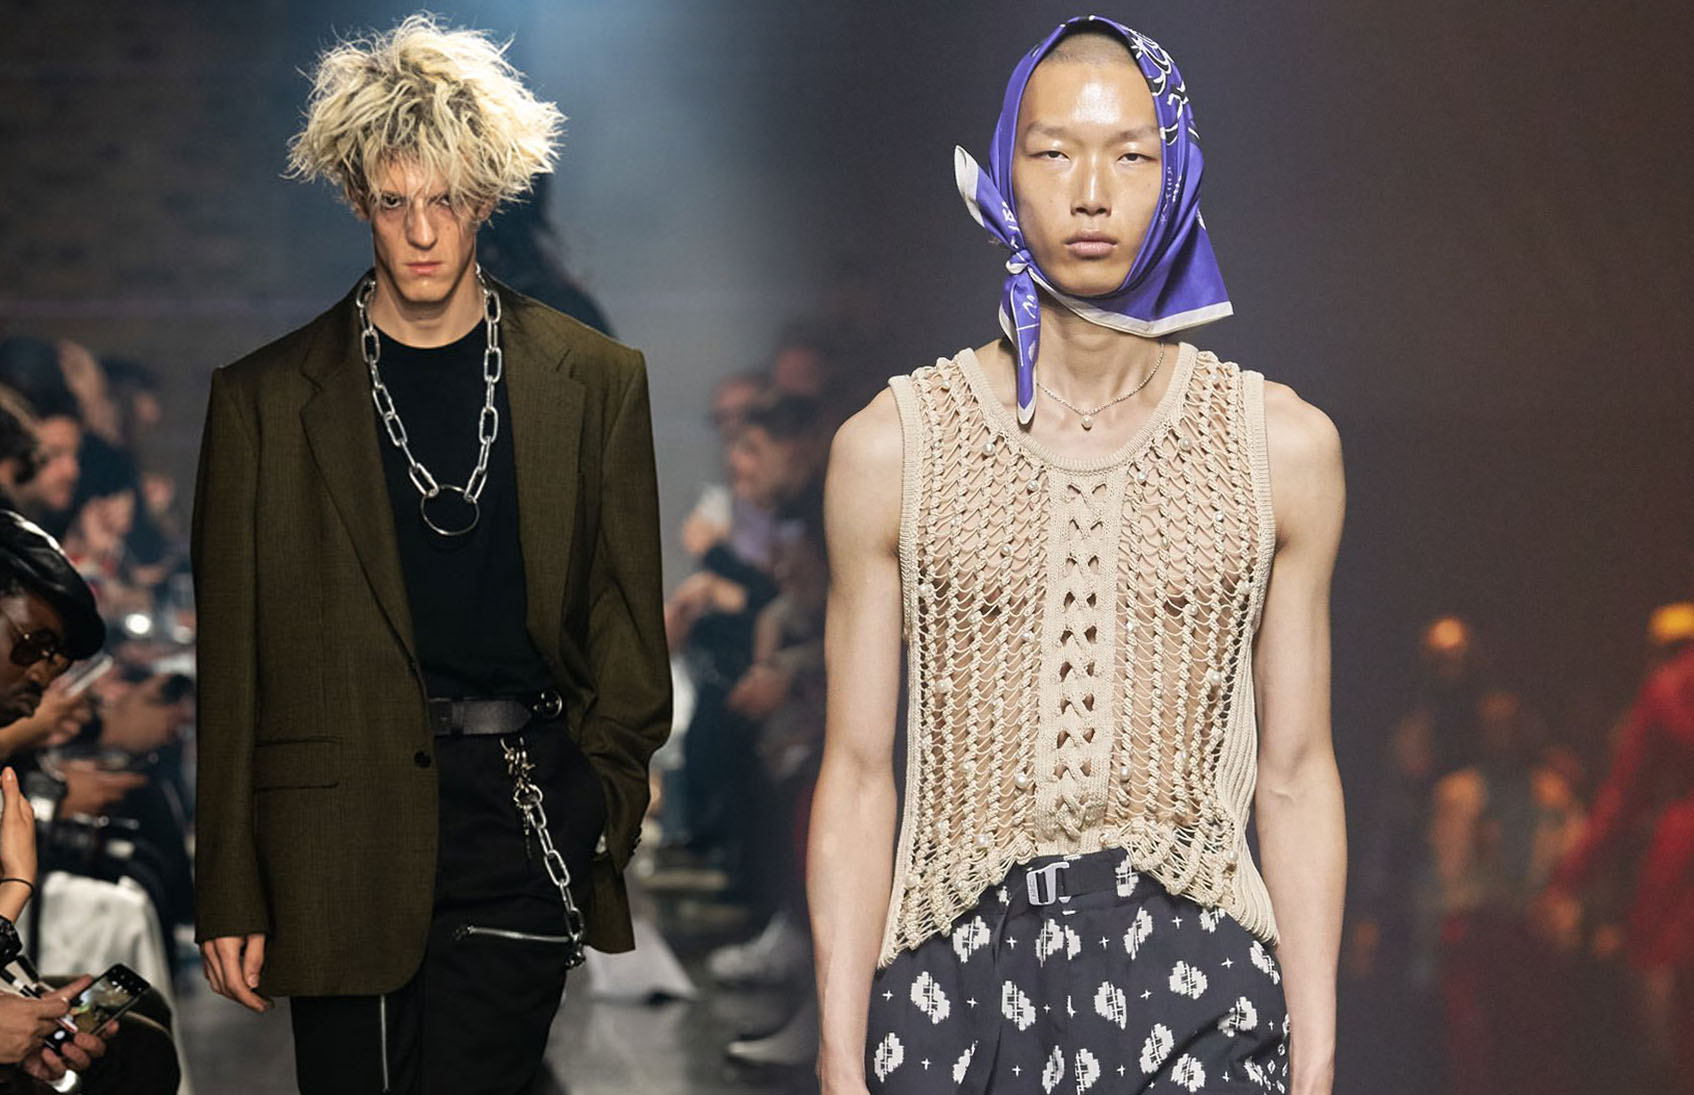 Spring Summer 2020 Fashion Trends To Know